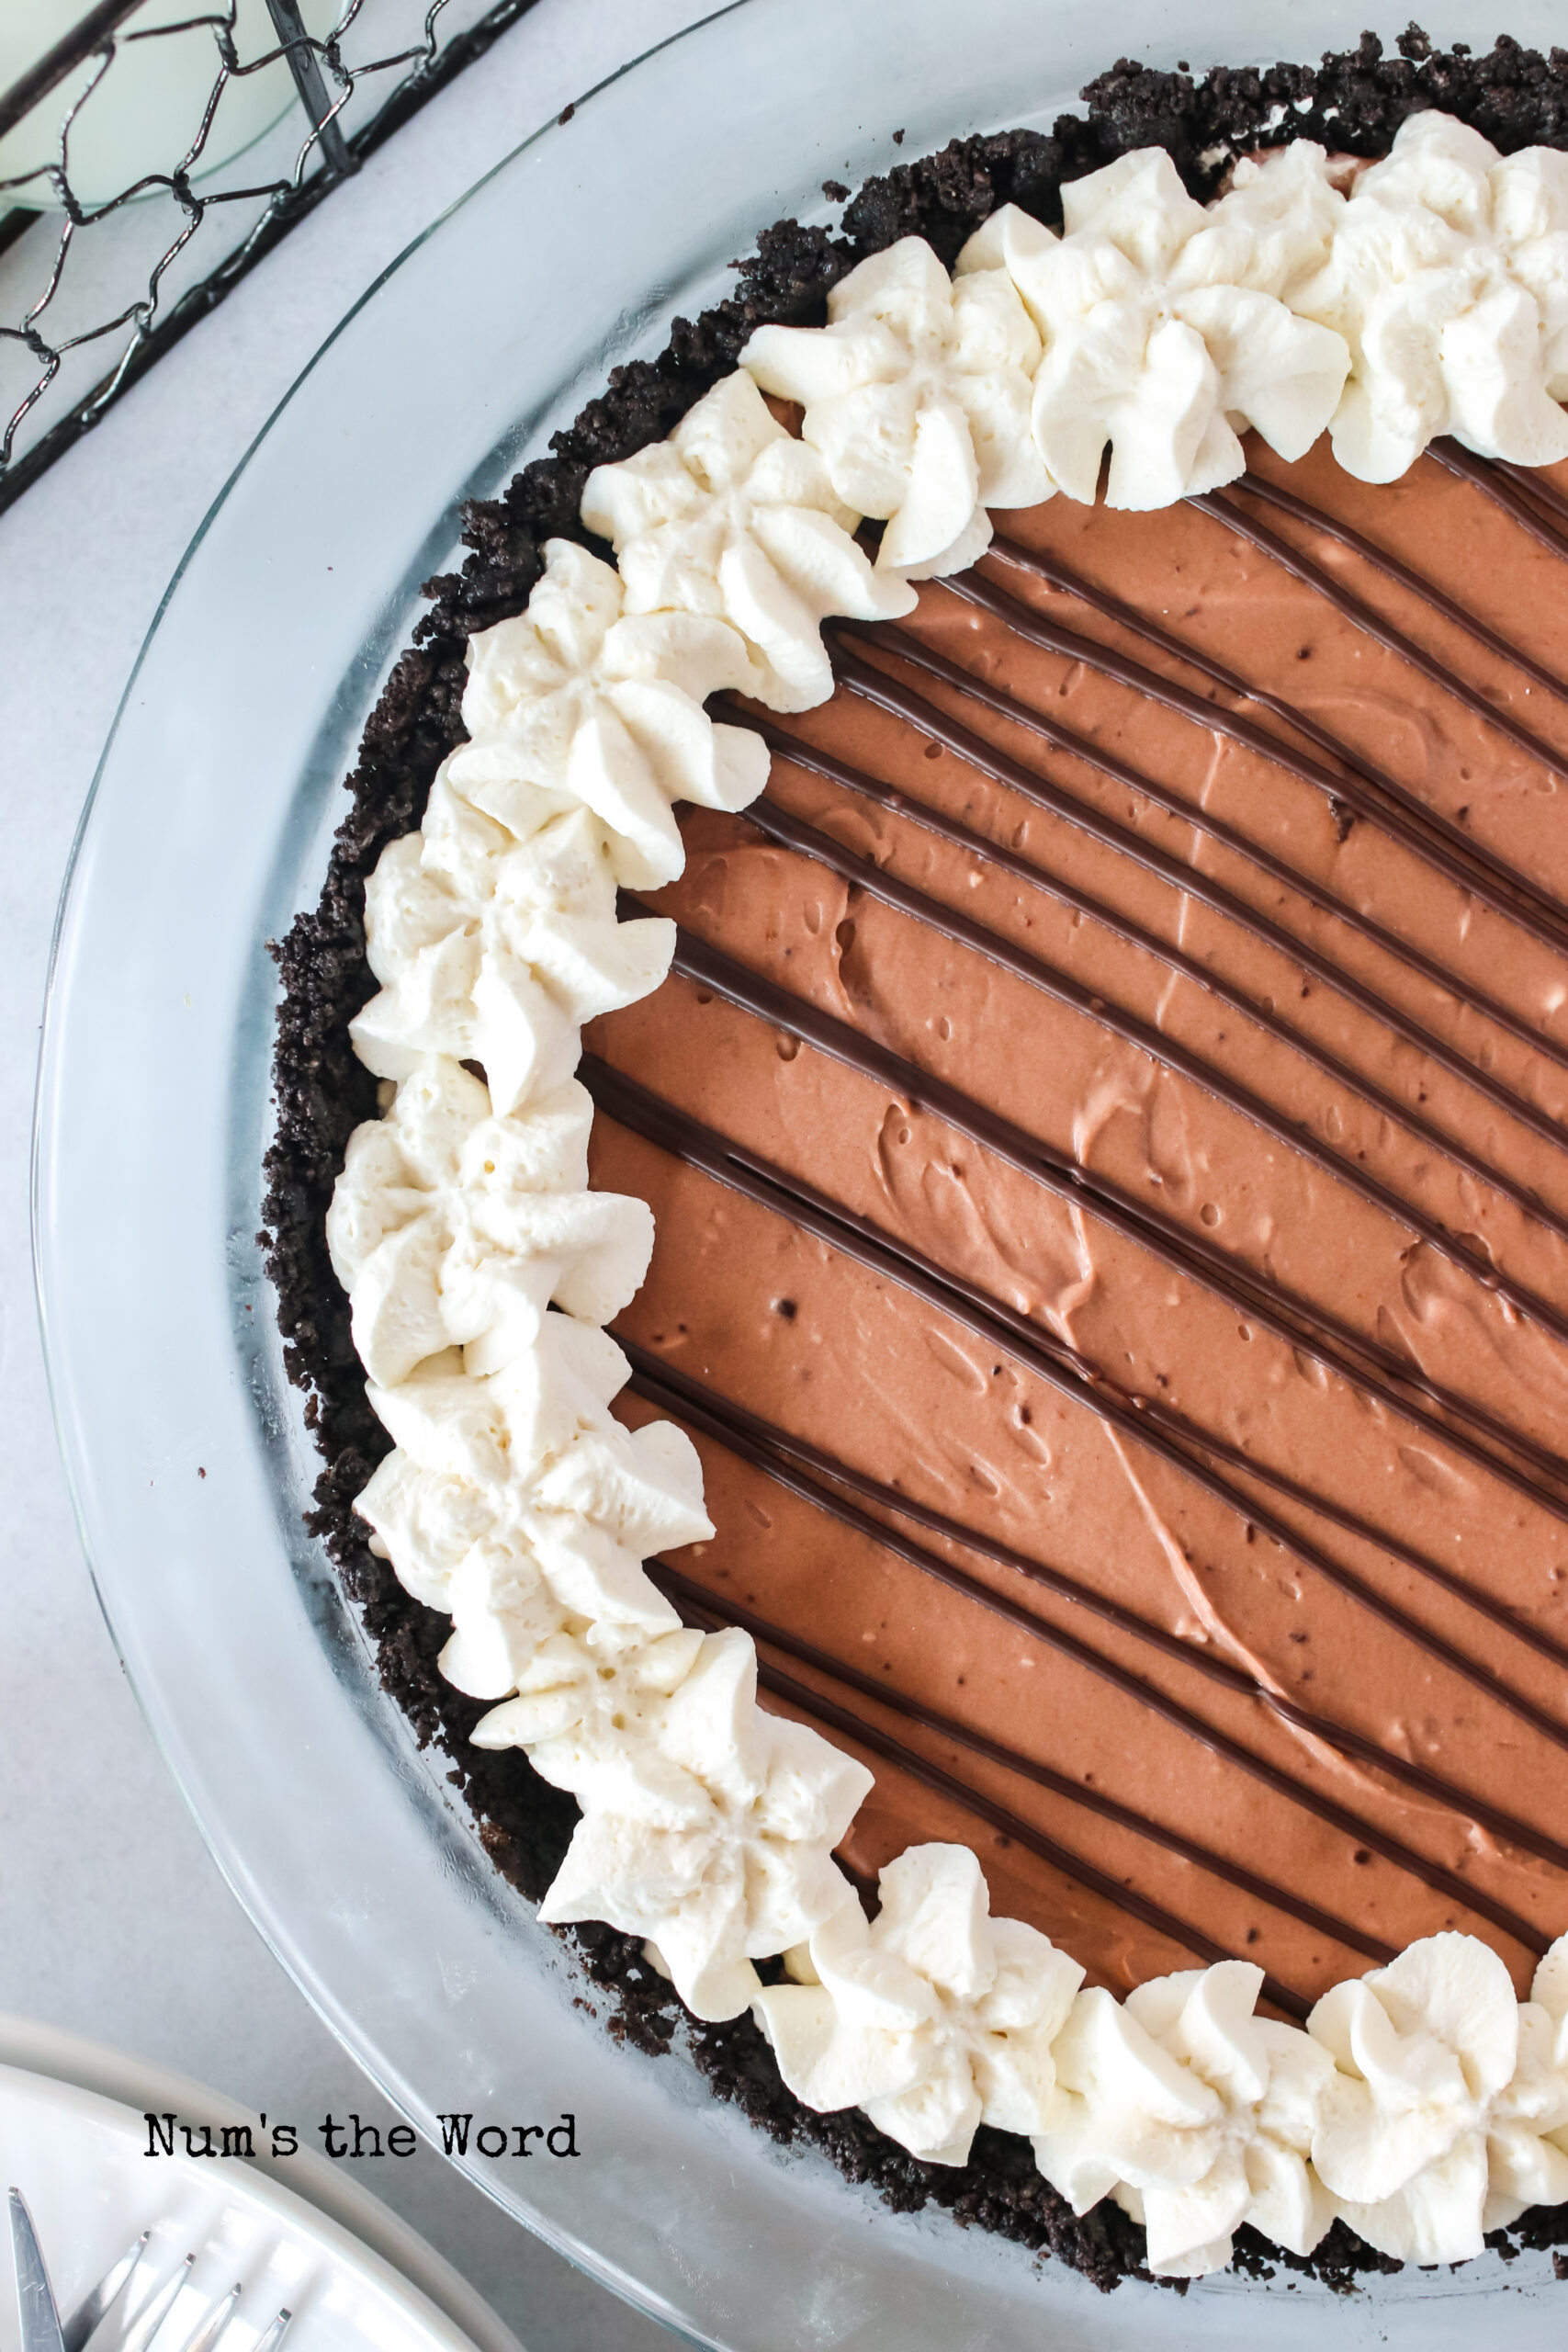 zoomed in image of cheesecake with chocolate and whipped cream